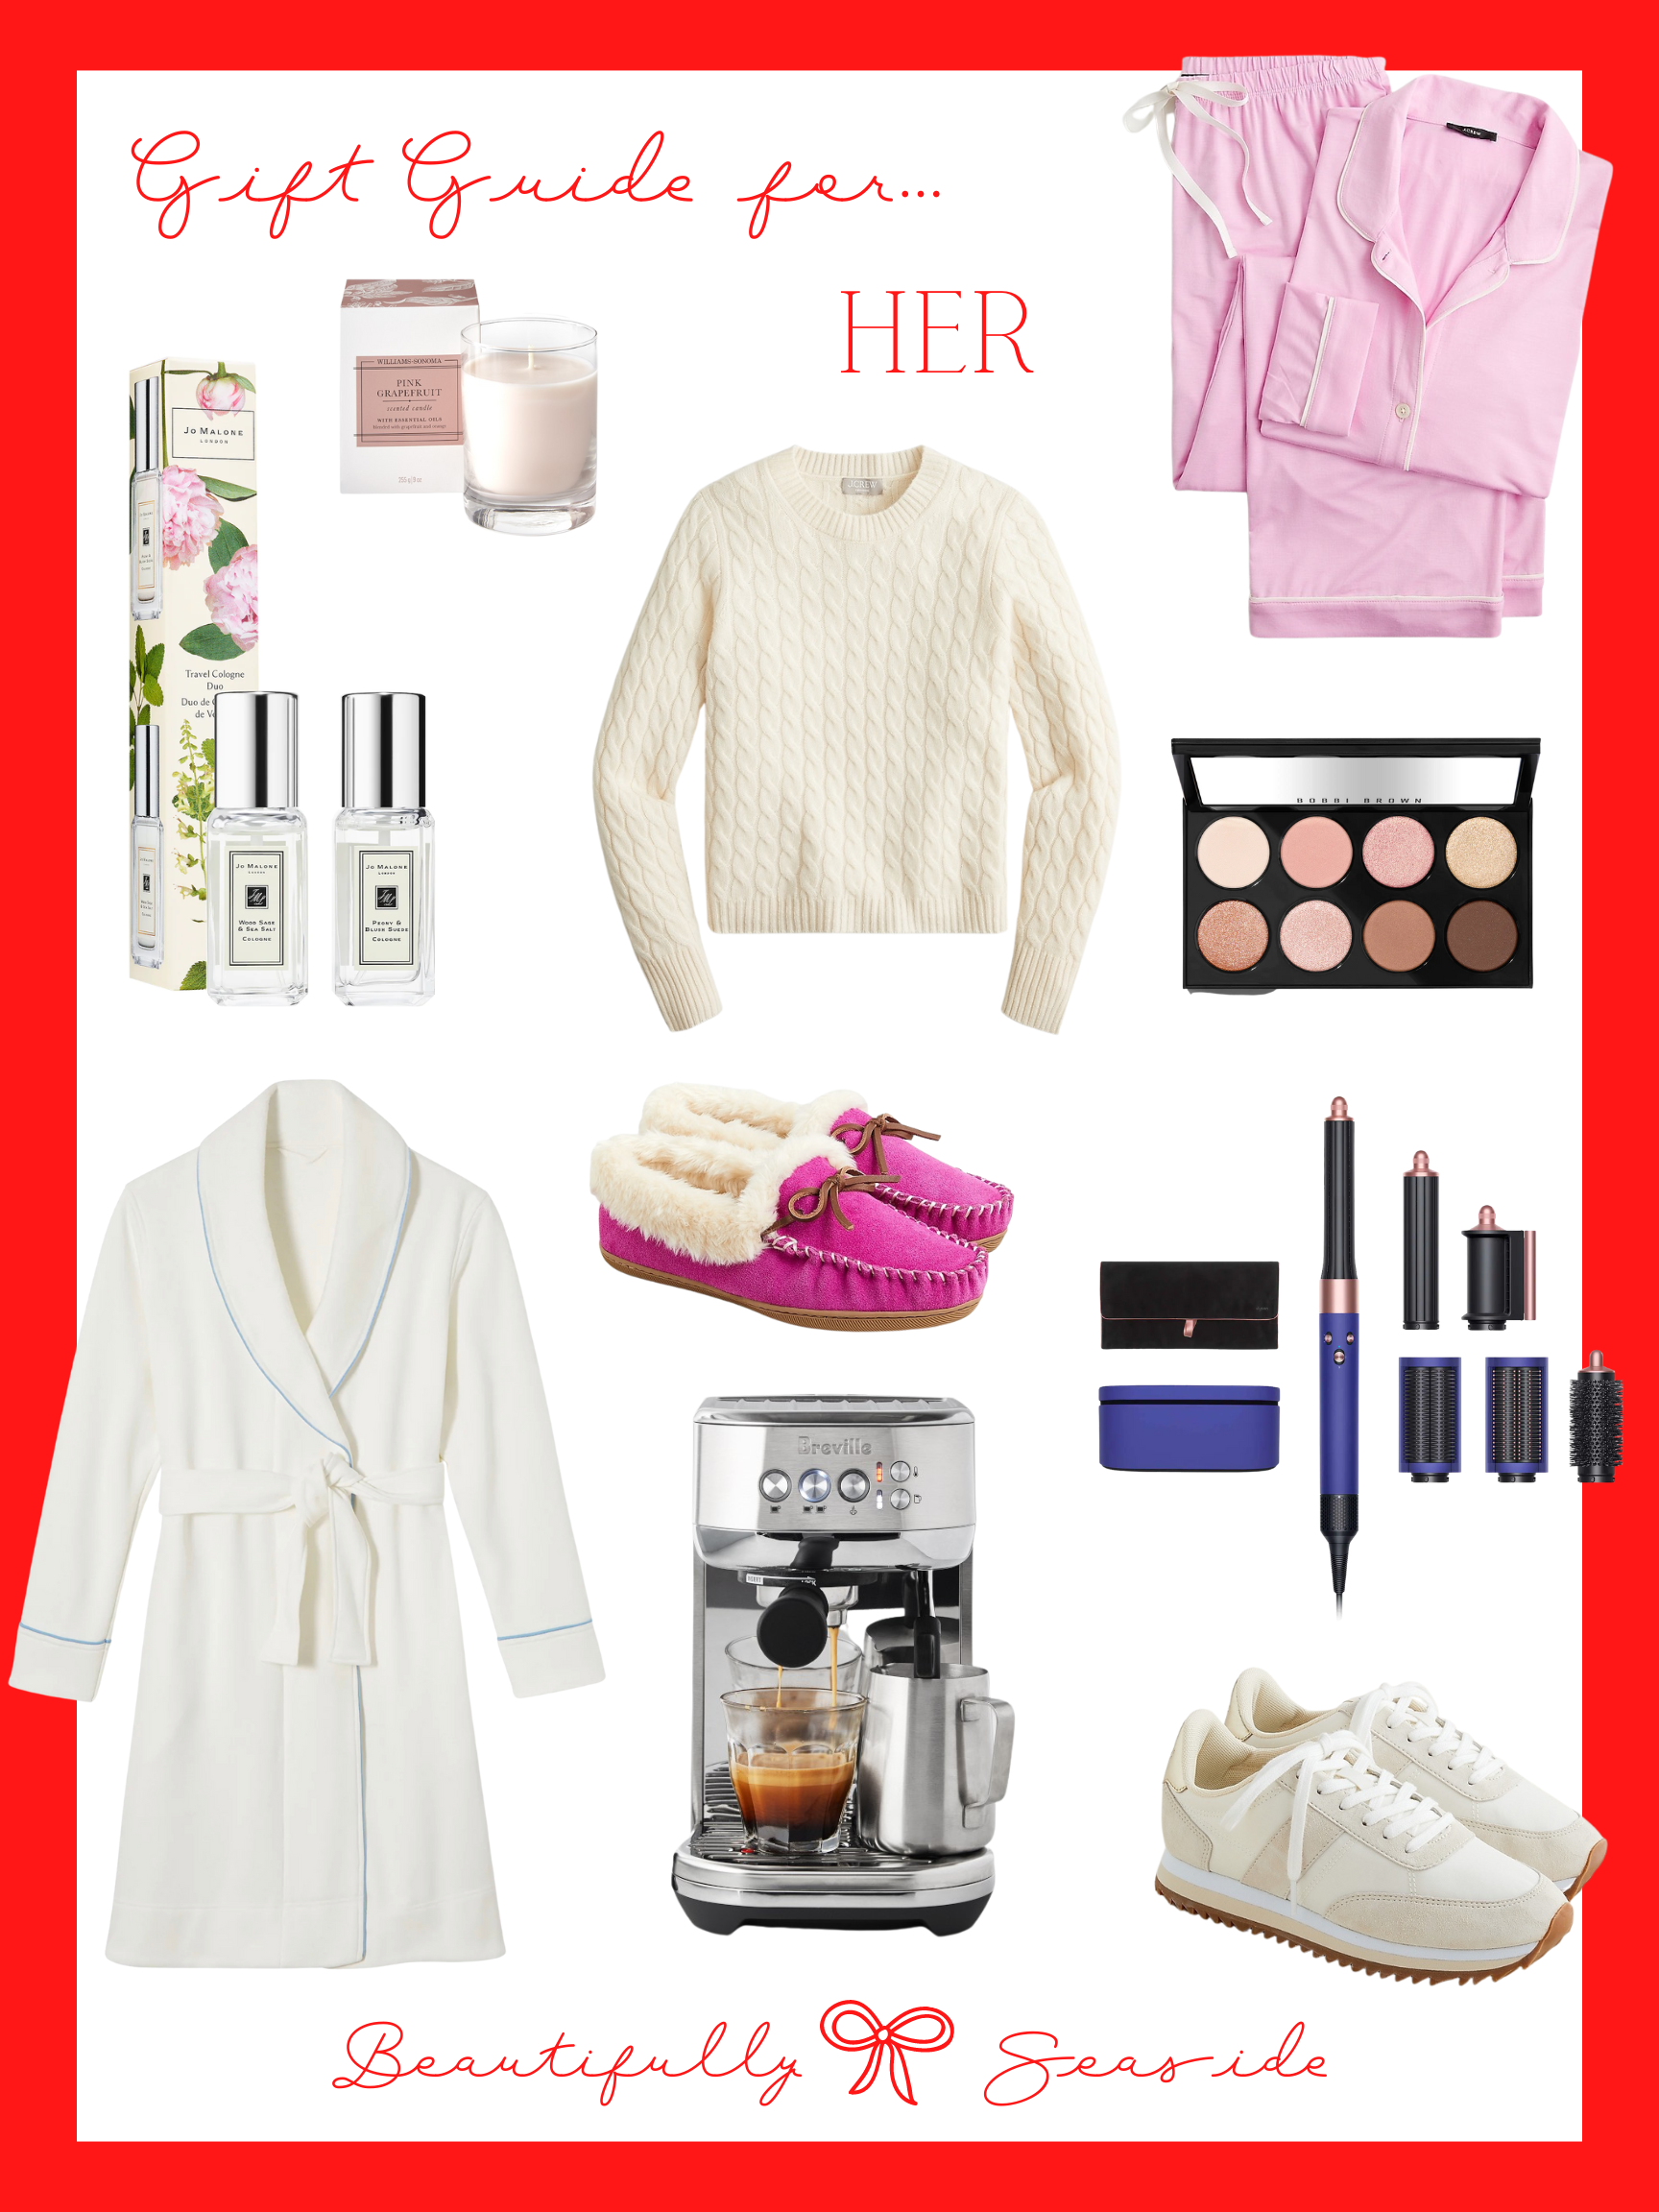 HOLIDAY GIFT GUIDE FOR HER by Desiree Leone of Beautifully Seaside